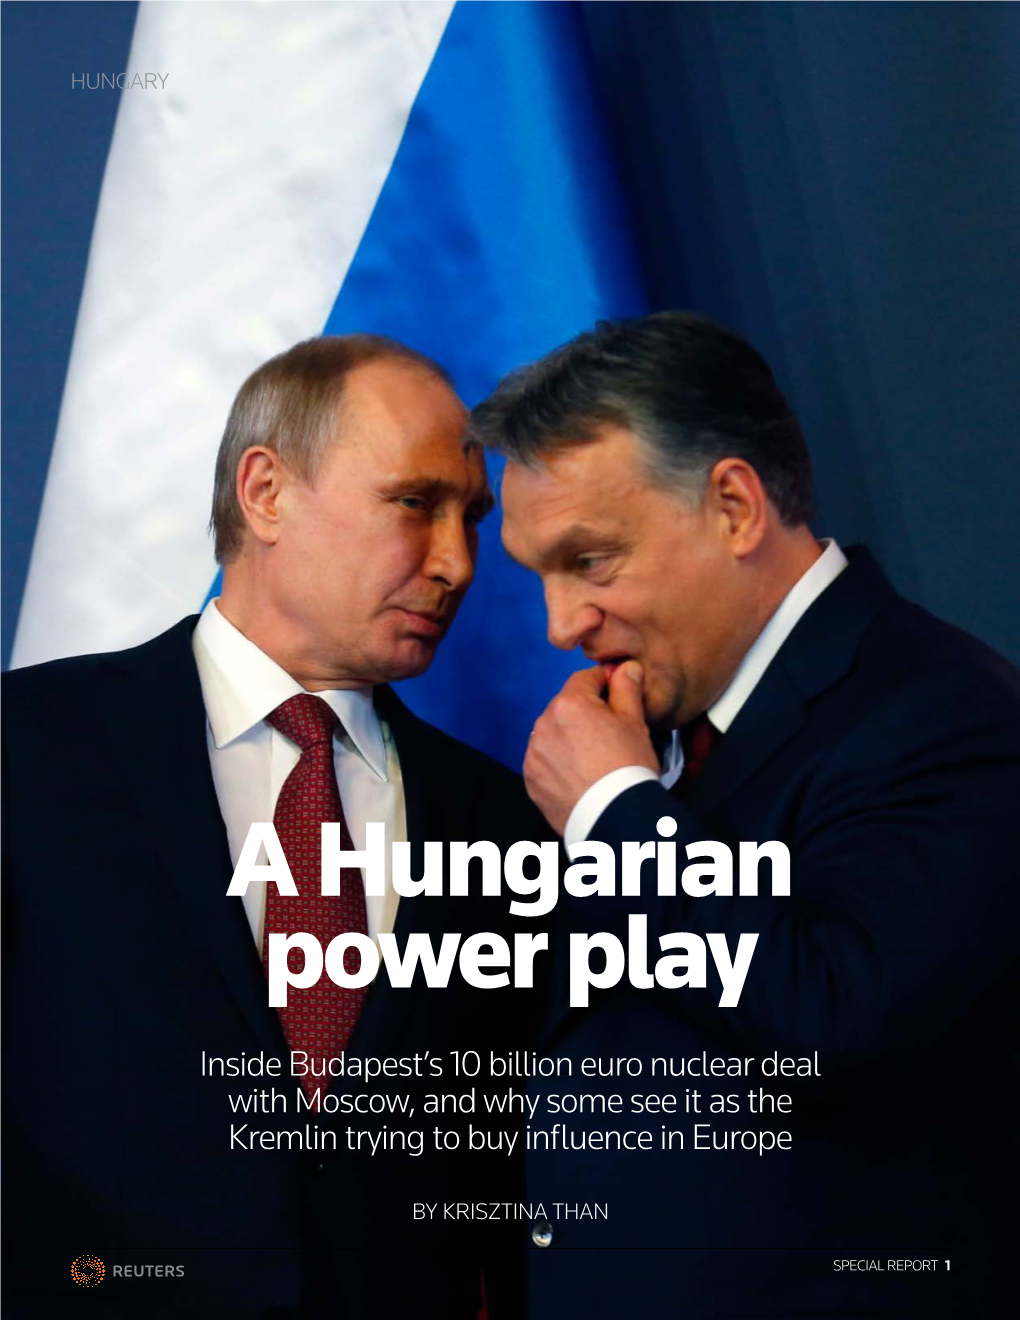 A Hungarian Power Play Inside Budapest’S 10 Billion Euro Nuclear Deal with Moscow, and Why Some See It As the Kremlin Trying to Buy Influence in Europe